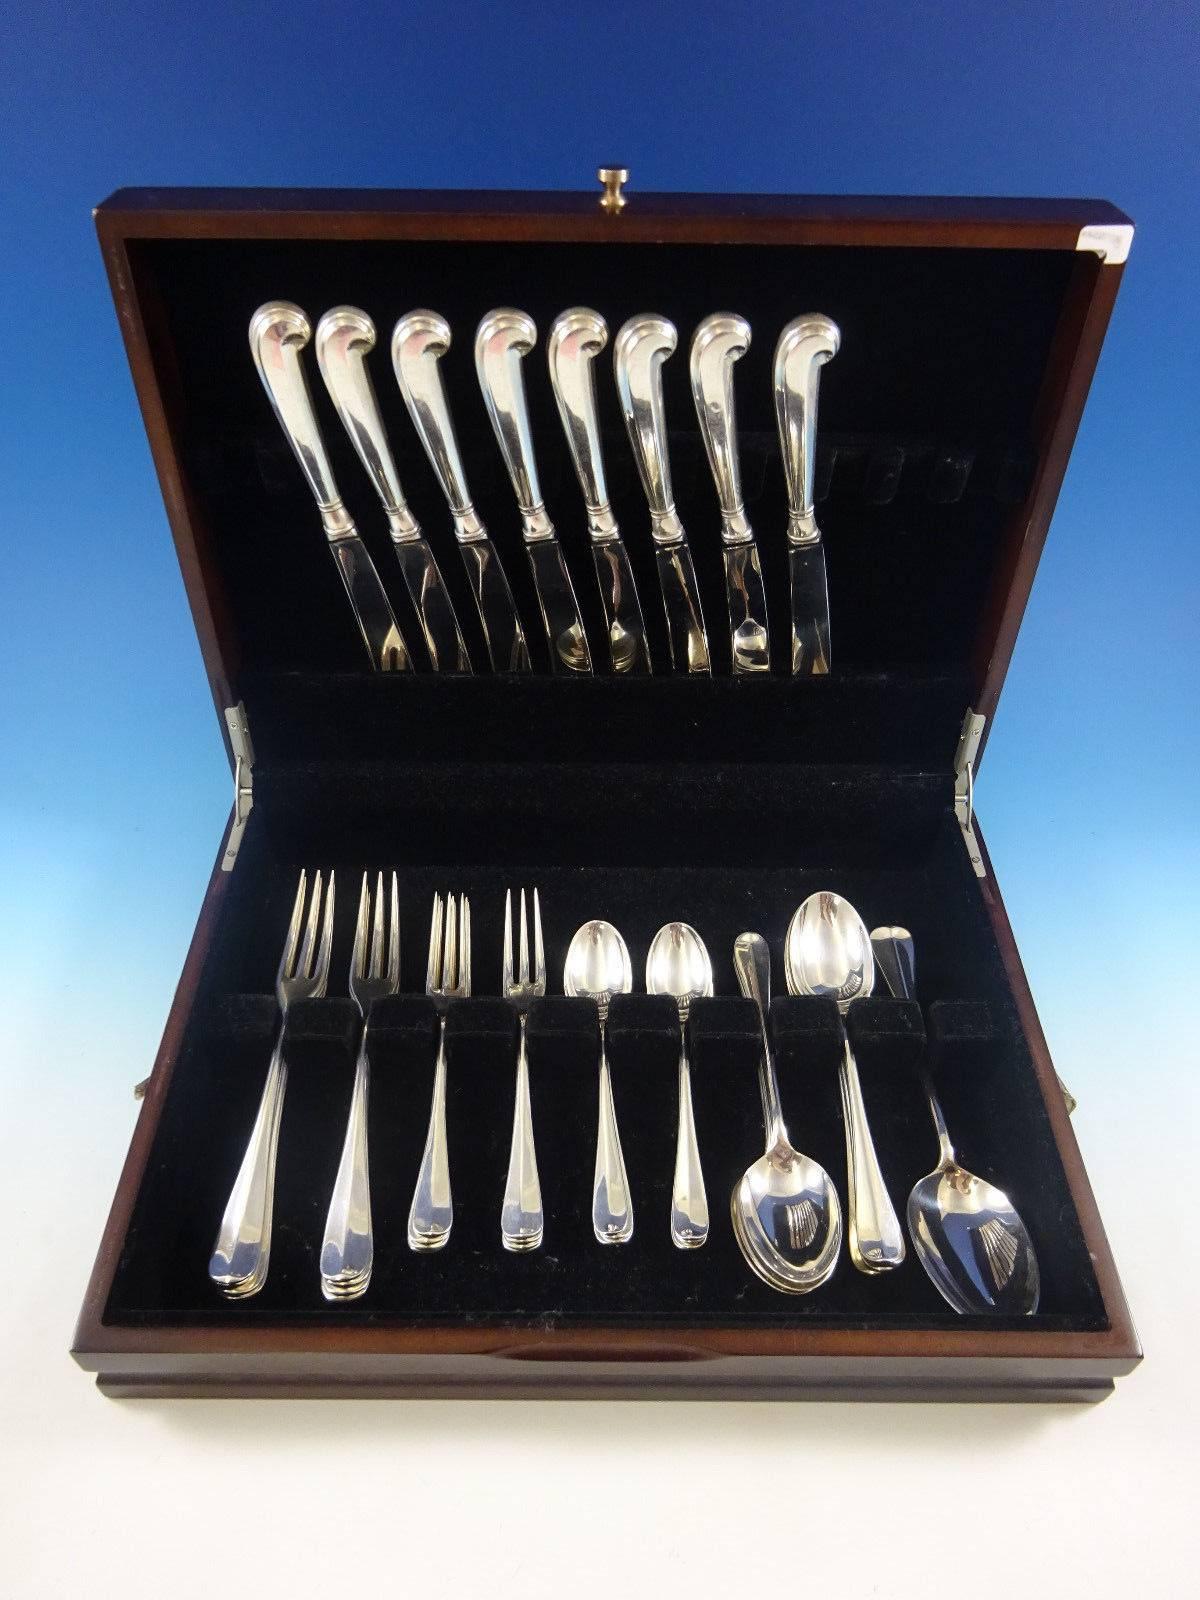 The Stieff Company was known for the quality and value of its silver products. Colonial Williamsburg commissioned Stieff to create Queen Anne in the year 1940.

Queen Anne-Williamsburg by Stieff sterling silver flatware set of 41 pieces. The pistol